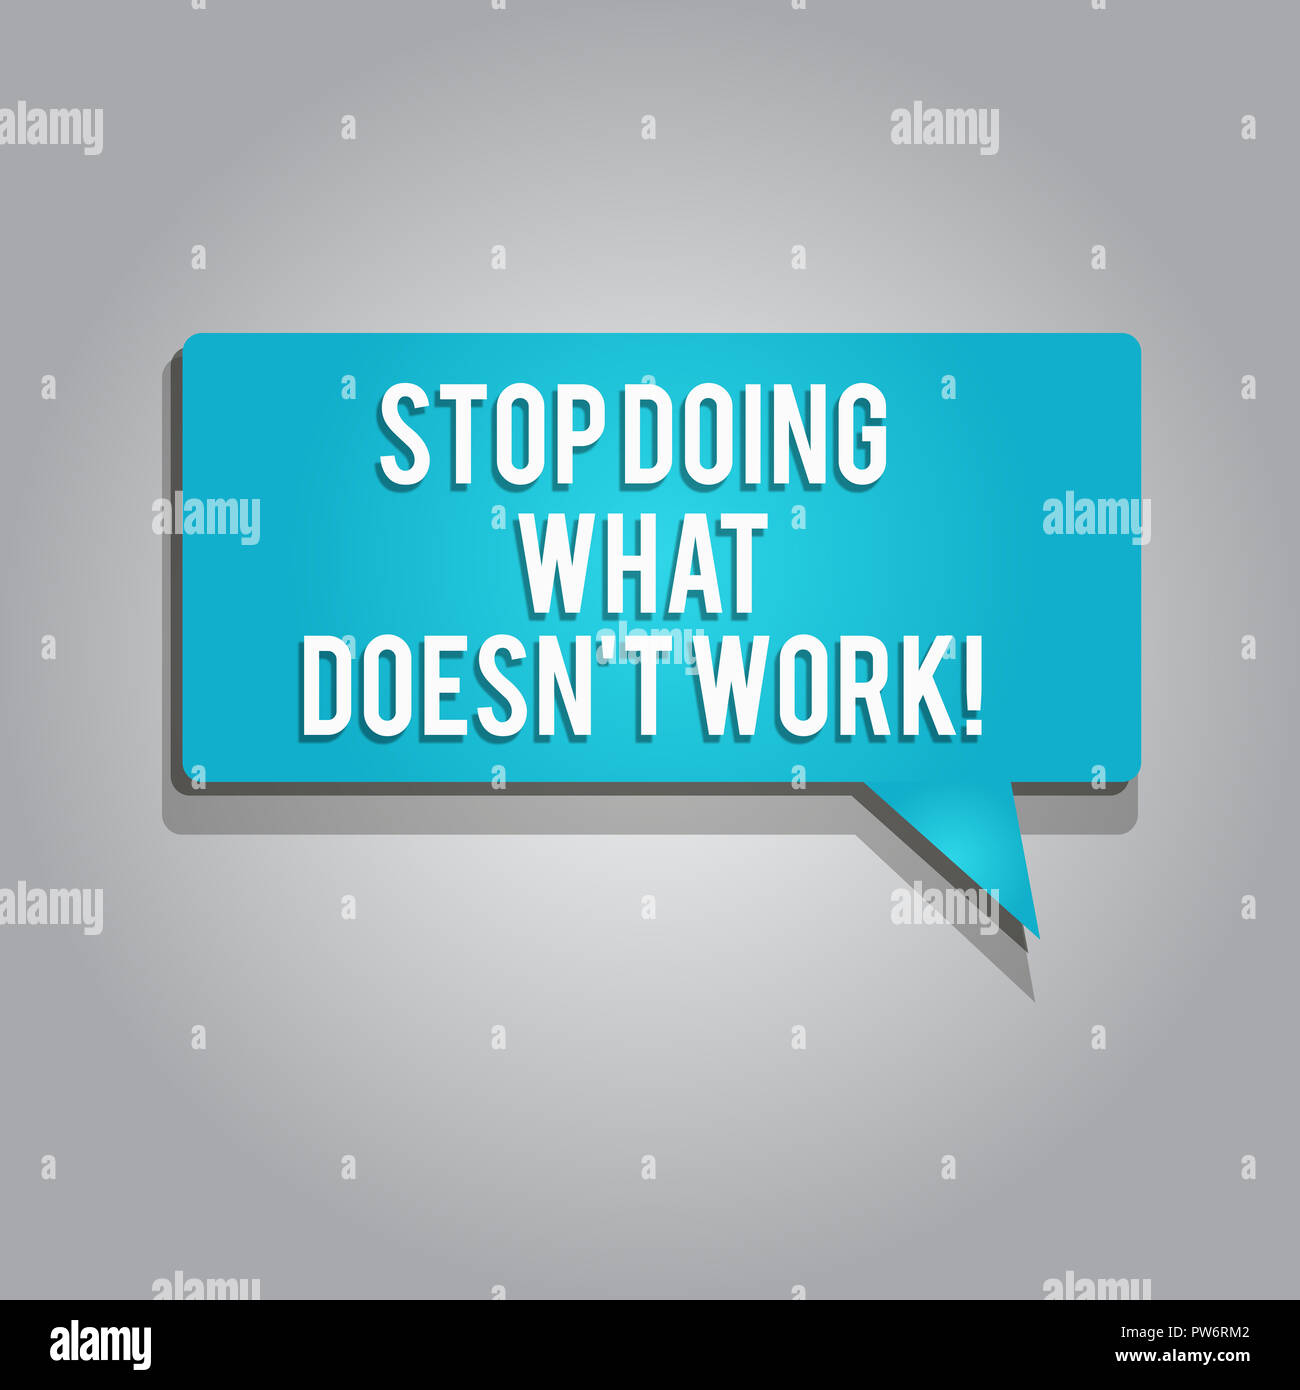 Word writing text Stop Doing What Doesn t not Work. Business concept for busy does not always mean being Productive. Stock Photo